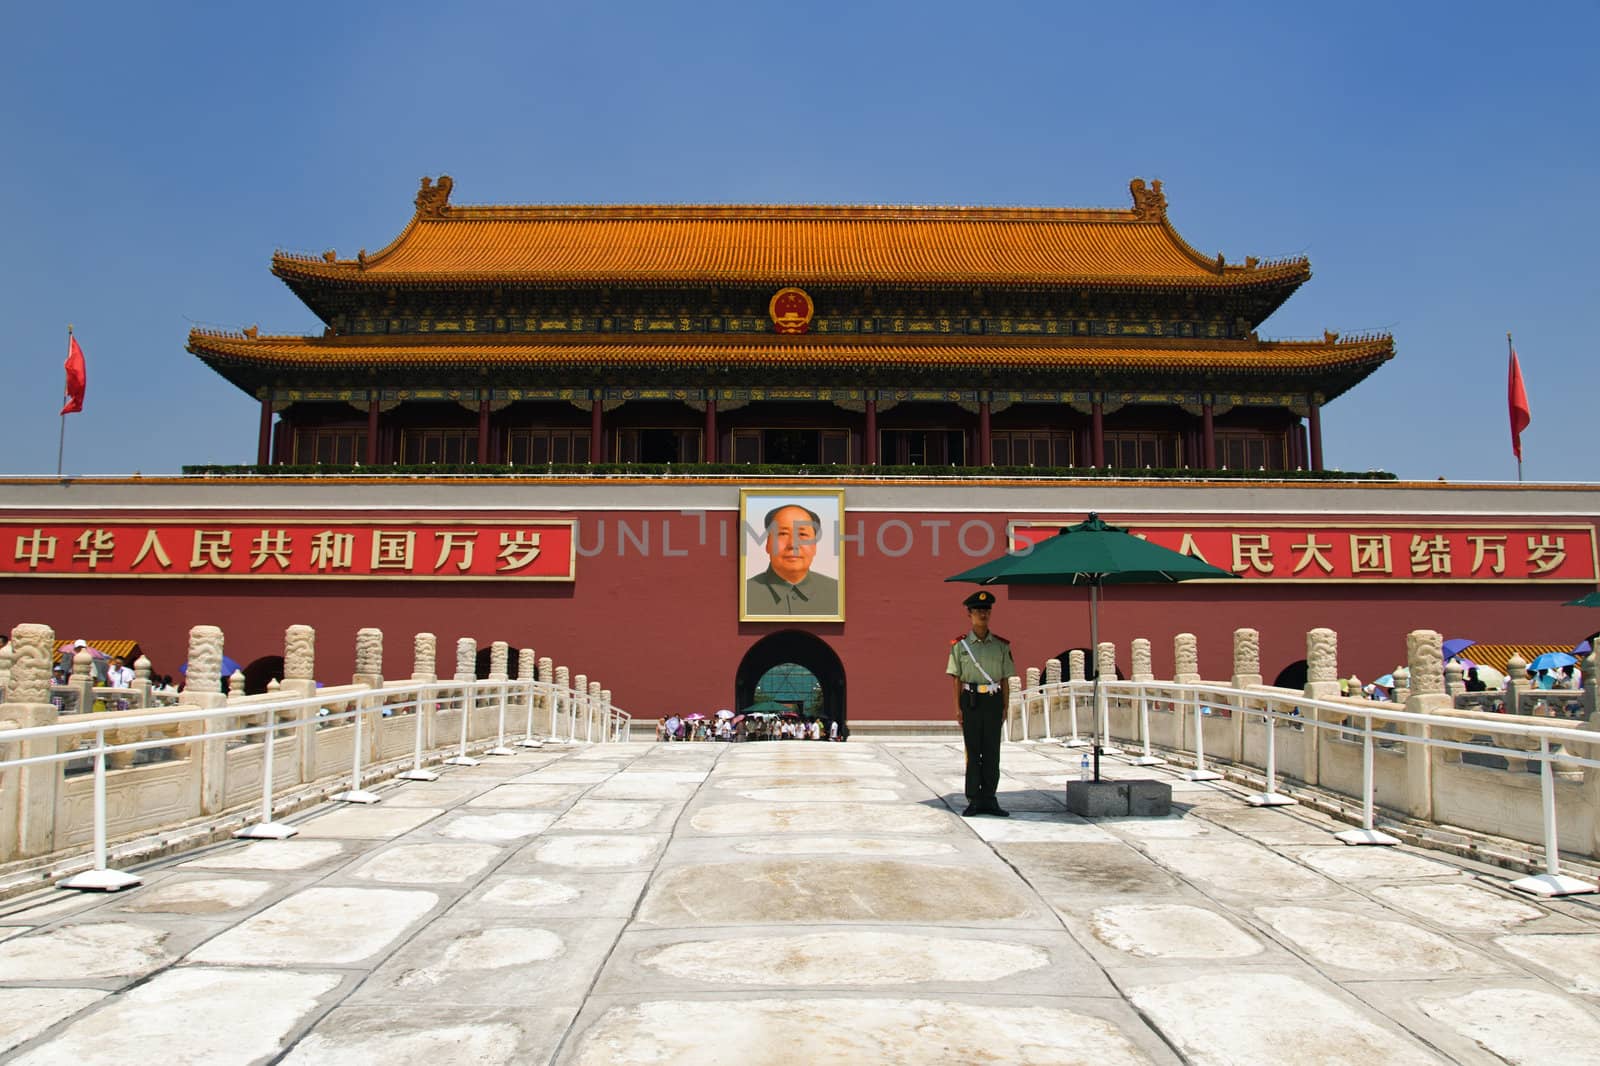 Guard outside the Entrance to The Forbidden City in Beijing, China, July 20 2010. To relieve congestion 70% of the Forbidden City is to open to the public by 2020, instead of the current 30%.